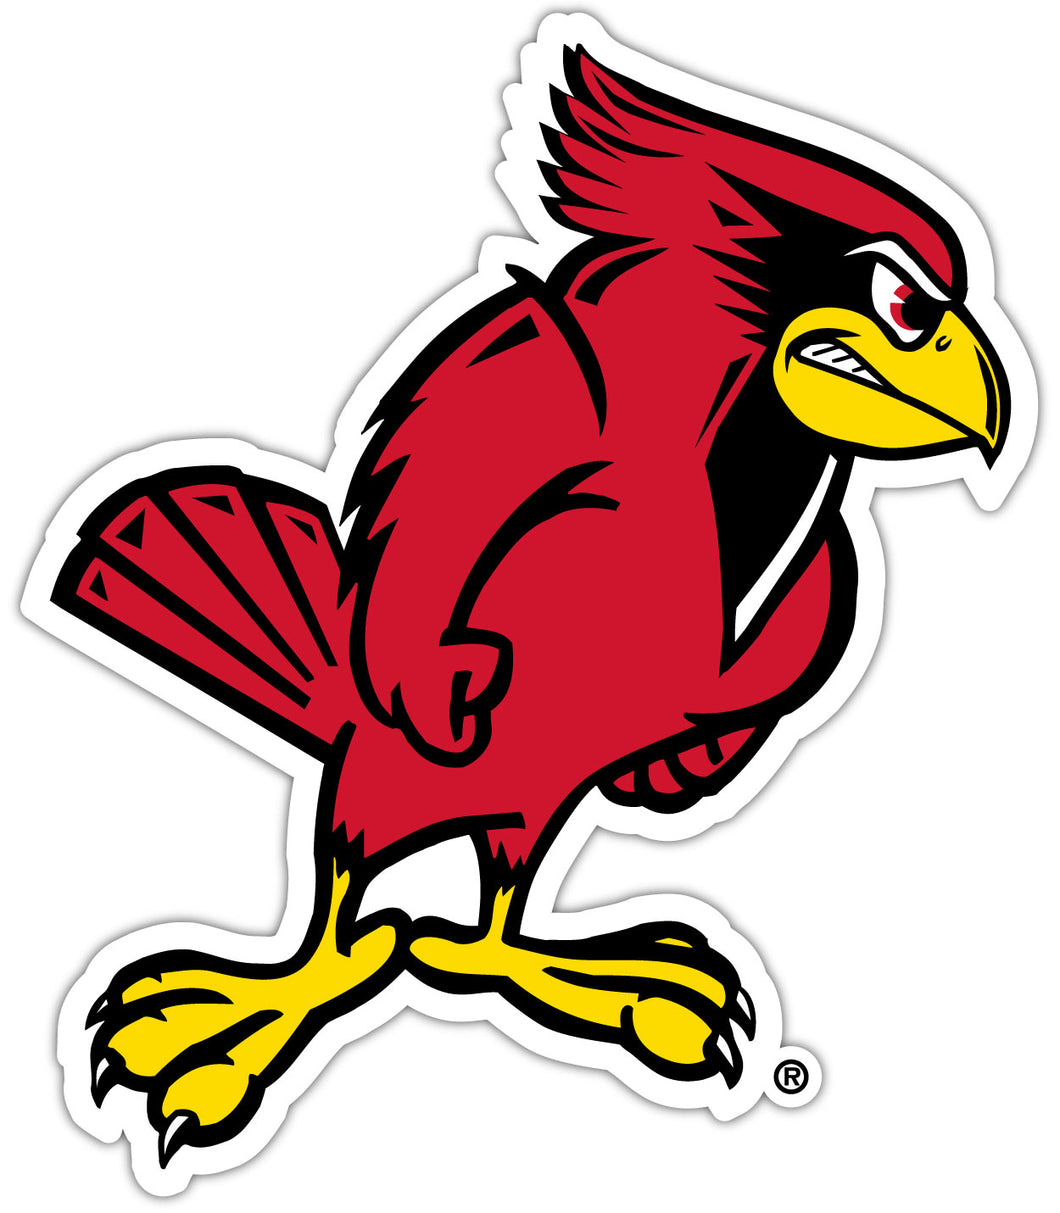 Illinois State Redbirds Mascot 14 Inch Tall NCAA Vinyl Decal Sticker for Fans, Students, and Alumni